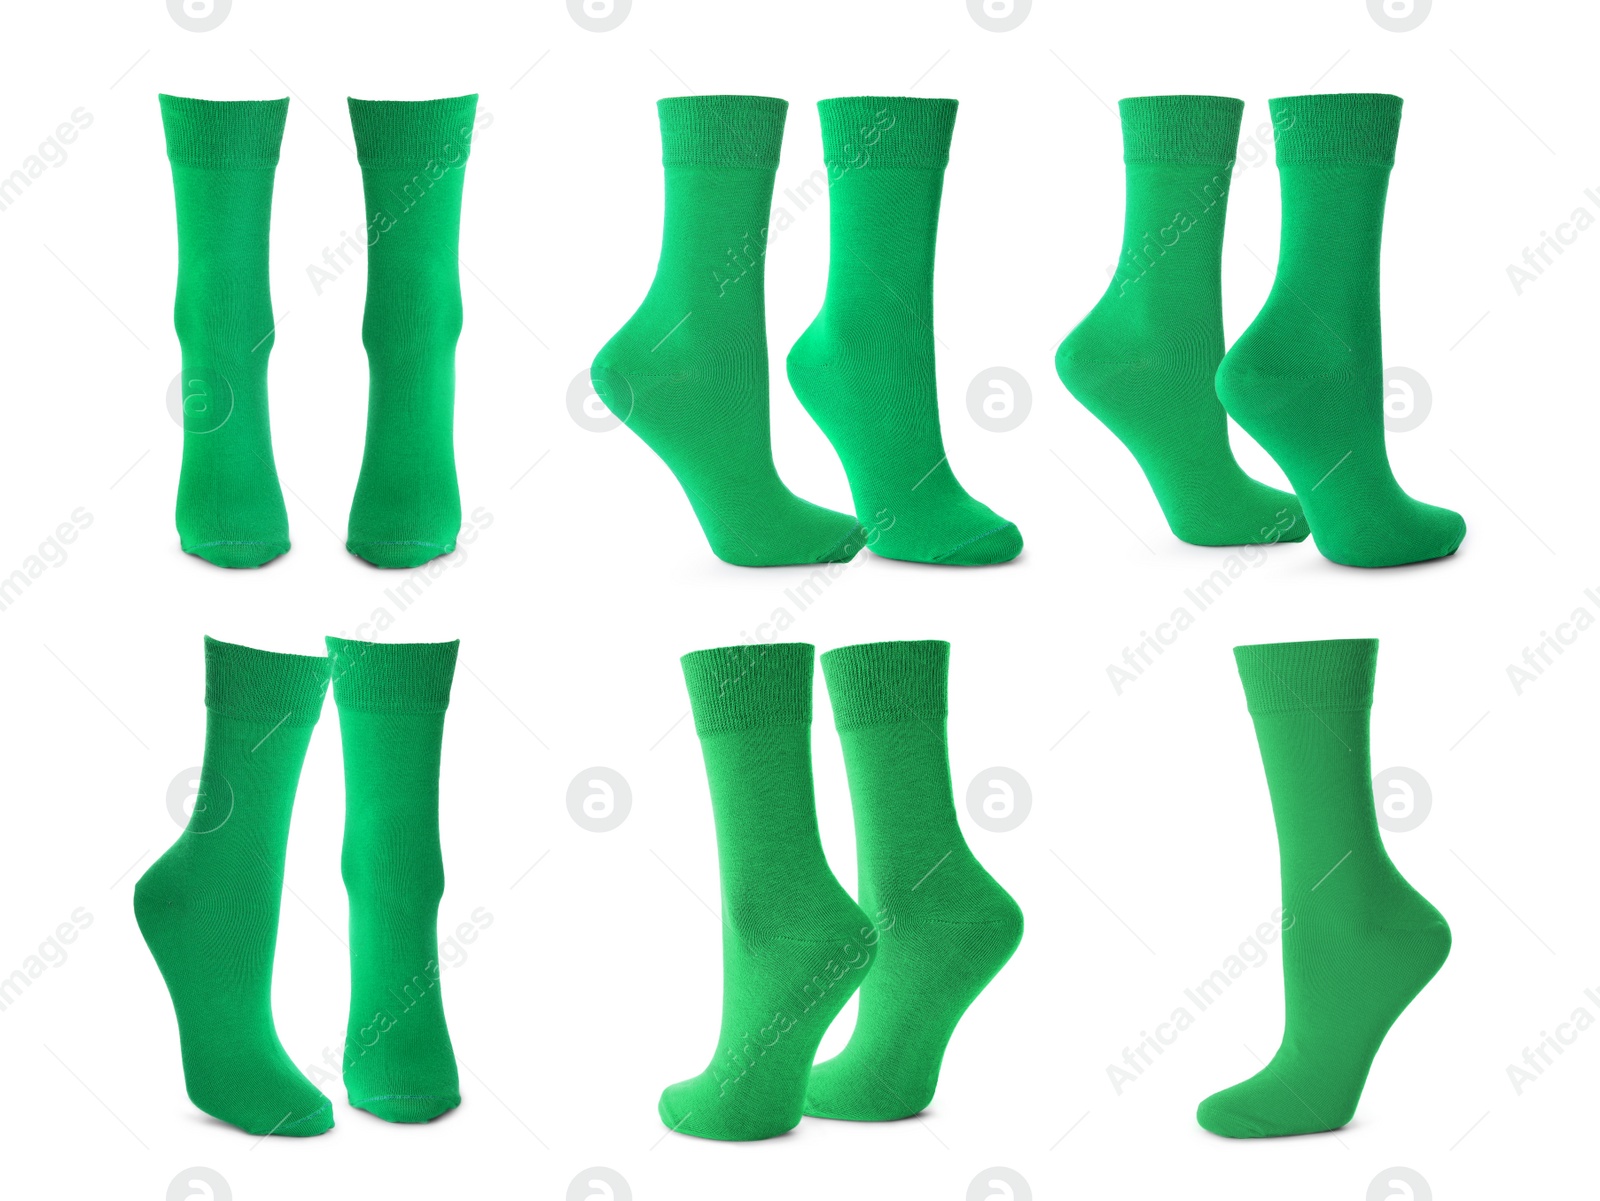 Image of Pairs of bright green socks on white background, collage